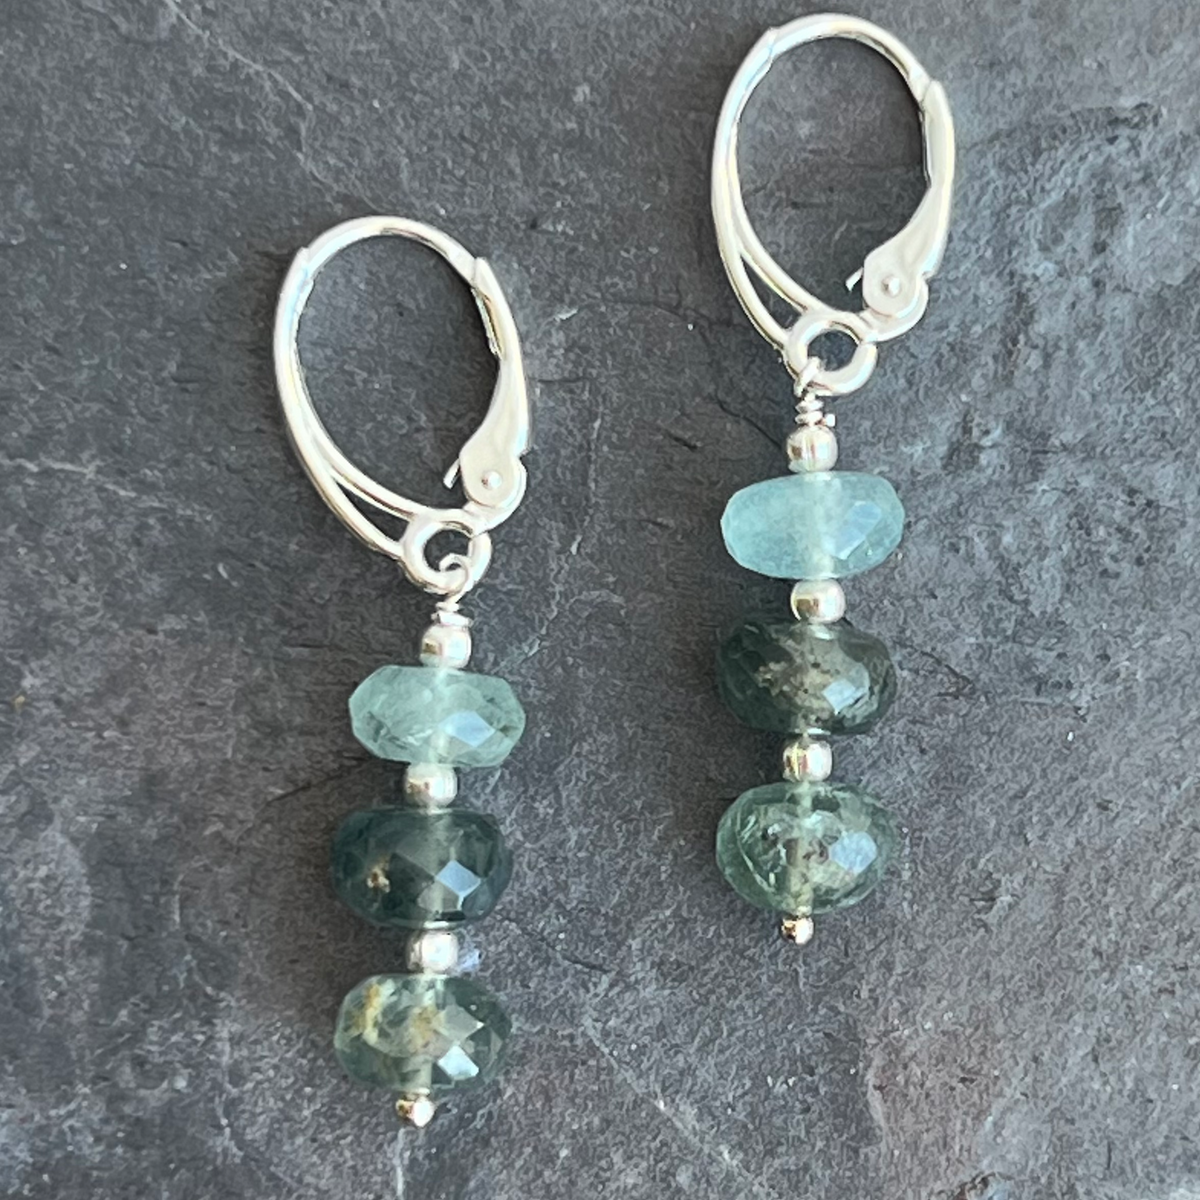 Sterling Moss Aquamarine Earrings at Garden of Silver.